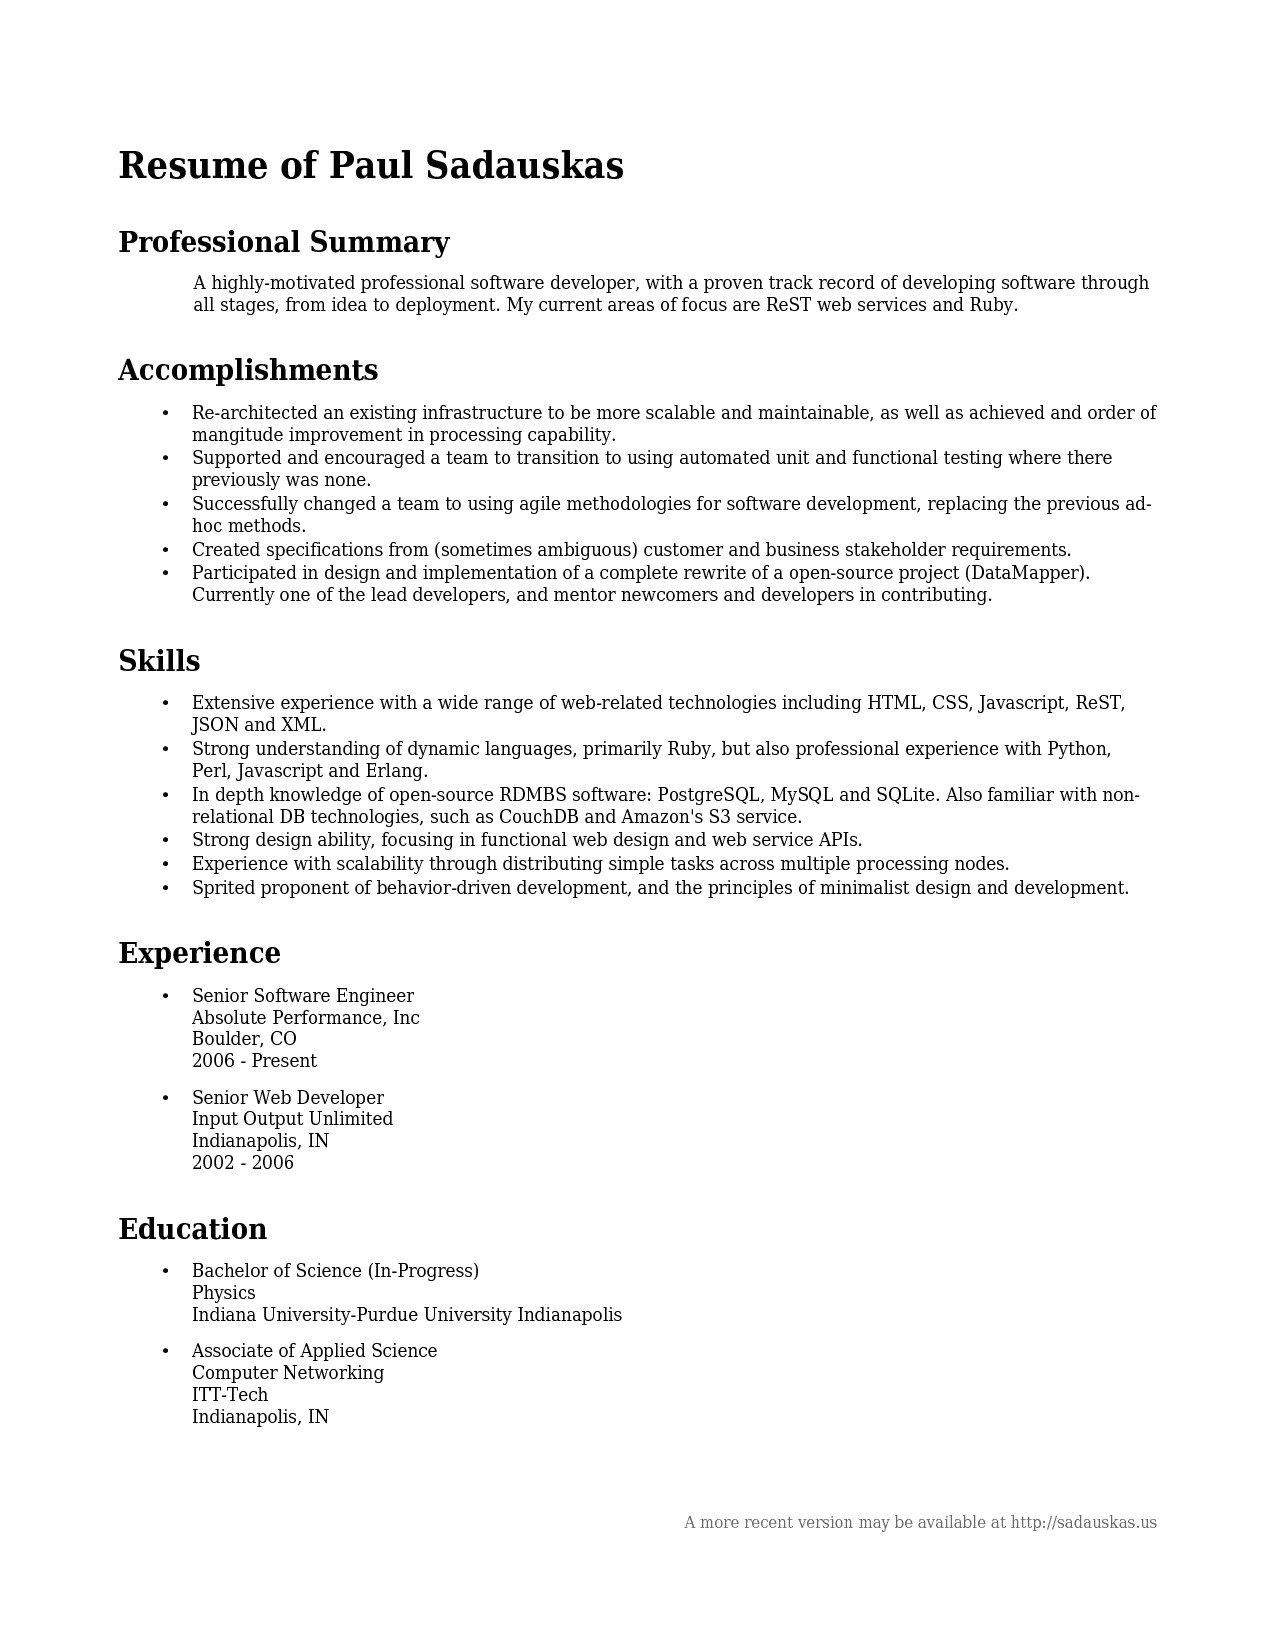 Samples Of Professional Summary for A Resume Professional Resume Summary 2016 Samplebusinessresume